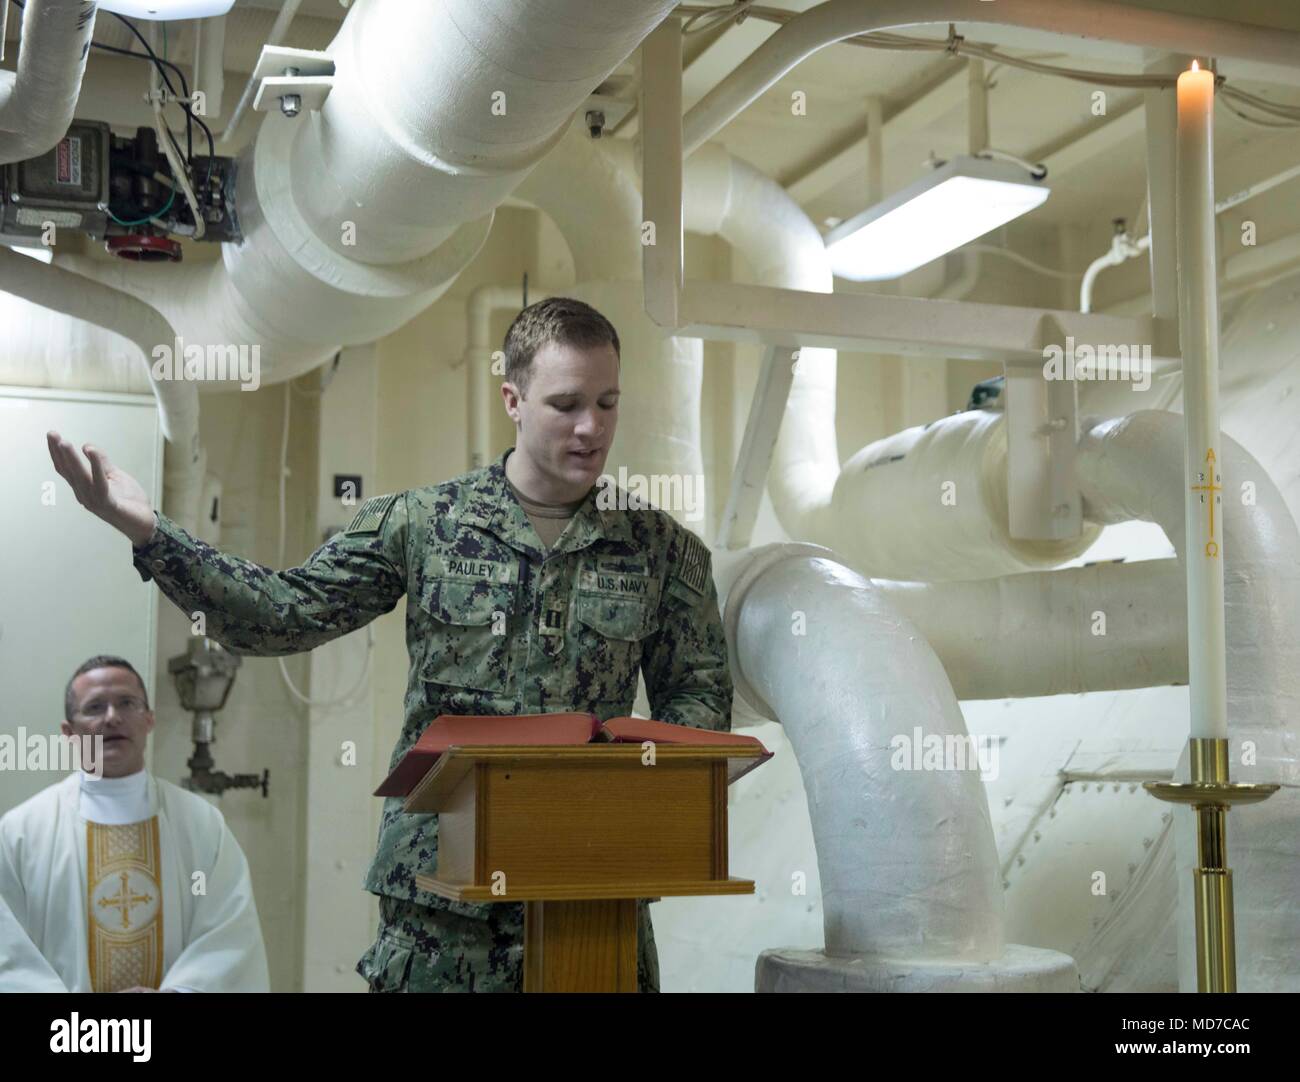 180401-N-GR168-0005 MEDITERRANEAN SEA (April 1, 2018) Lt. Blake Pauley, from Hudson, Ohio, reads scripture during Easter mass in the chapel aboard the San Antonio-class amphibious transport dock ship USS New York (LPD 21) April 1, 2018. New York, homeported in Mayport, Fla., is conducting naval operations in the U.S. 6th Fleet area of operations. (U.S. Navy photo by Mass Communication Specialist 2nd Class Lyle Wilkie/Released) Stock Photo